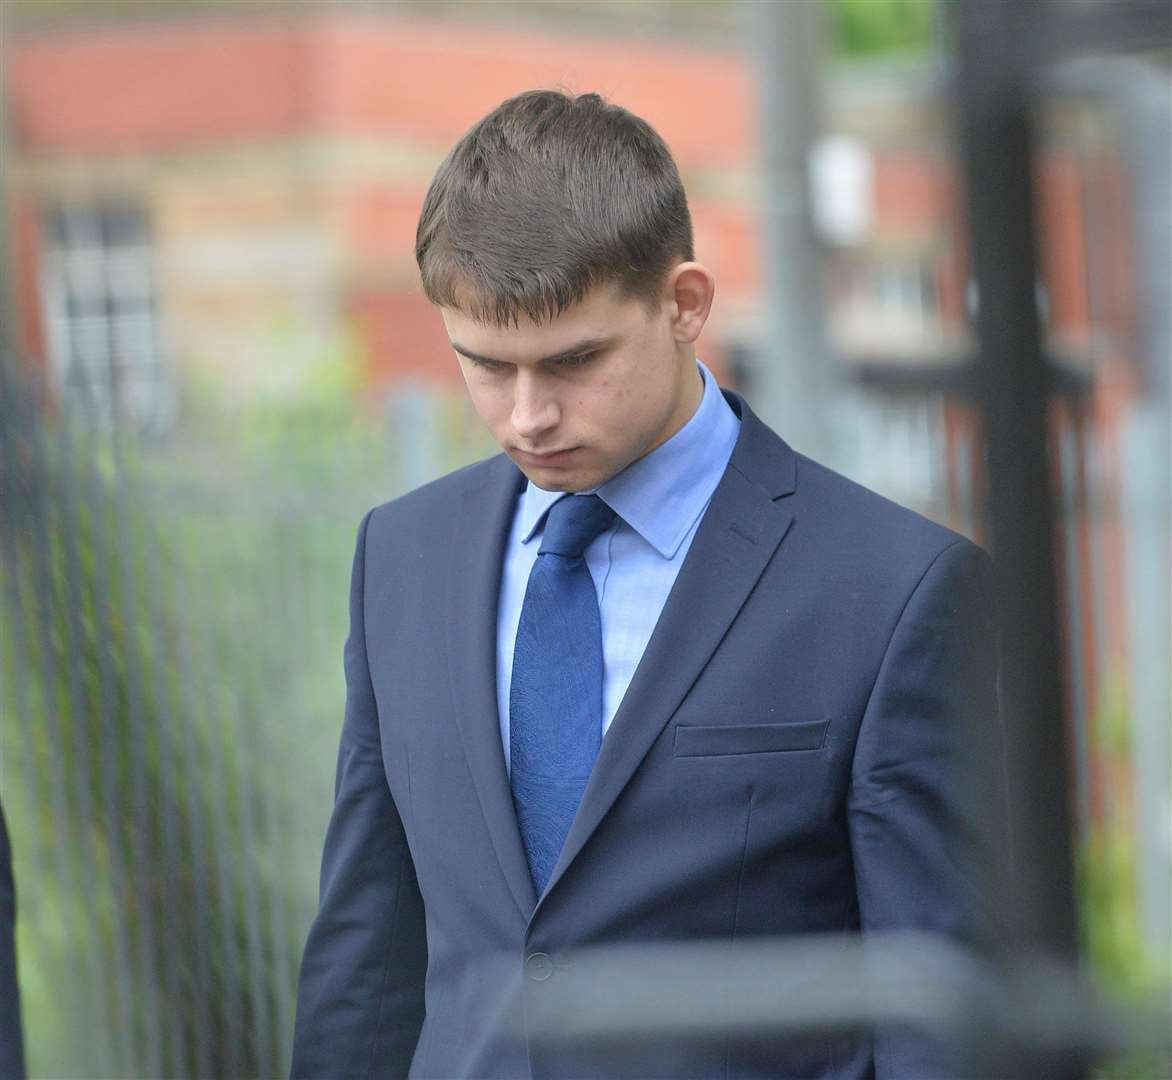 Daniel McFarlane was convicted of two rapes at the High Court in Glasgow.